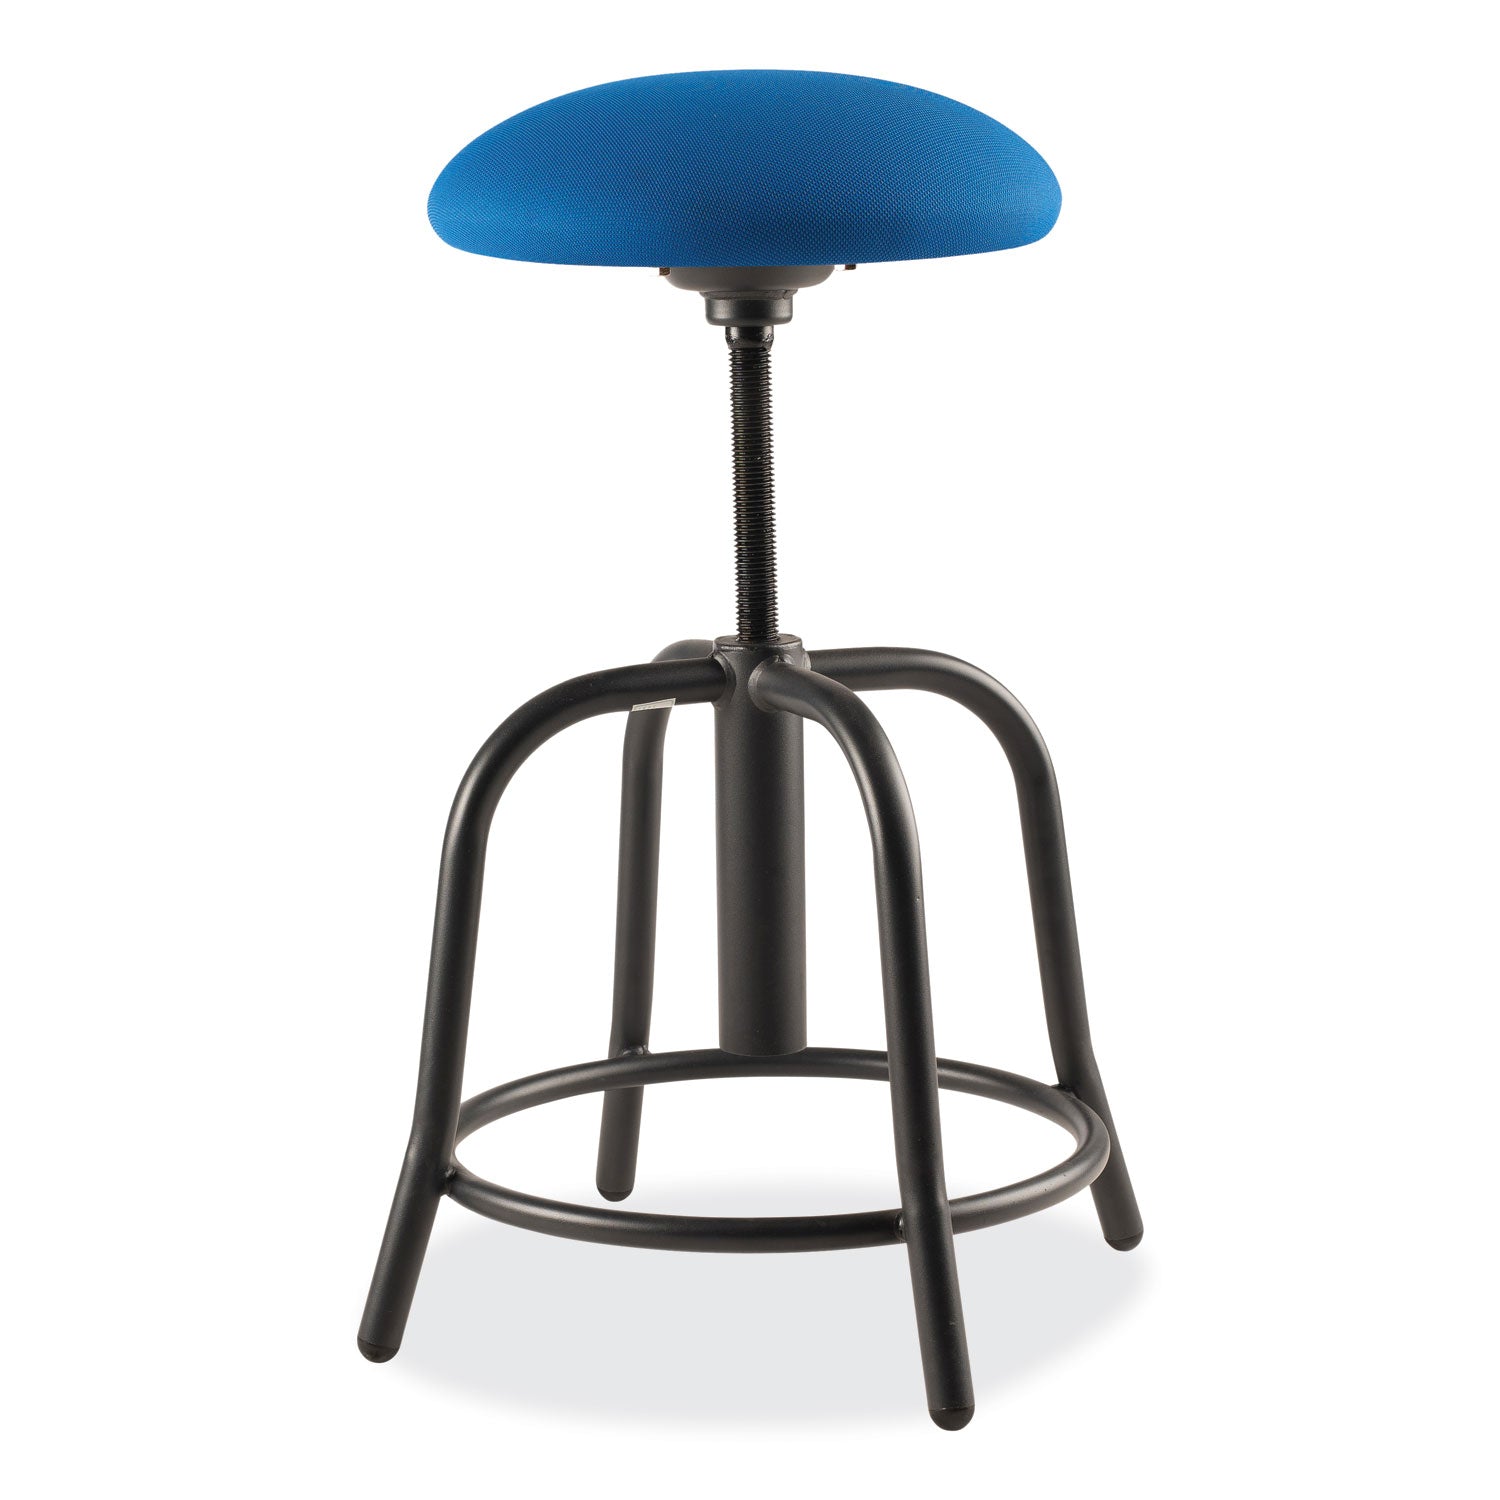 6800-series-height-adj-fabric-padded-seat-stool-support-300lb-18-25-ht-cobalt-blue-seat-black-baseships-in-1-3-bus-days_nps6825s10 - 2